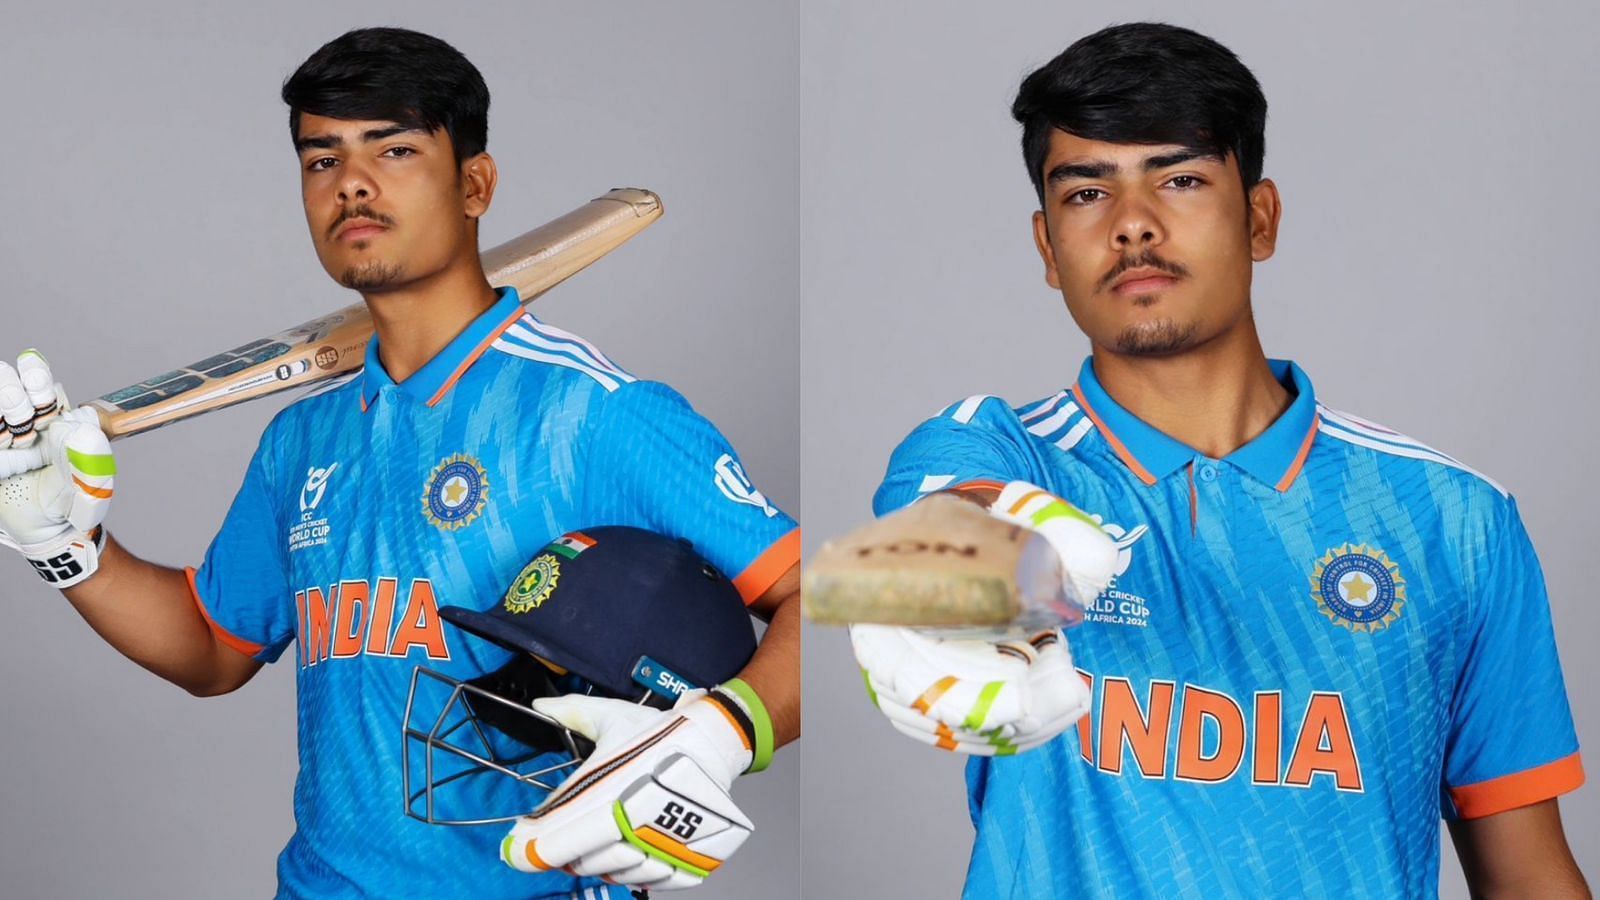 Uday Saharan is the skipper of India in ICC U-19 World Cup 2024 (Image: Instagram)